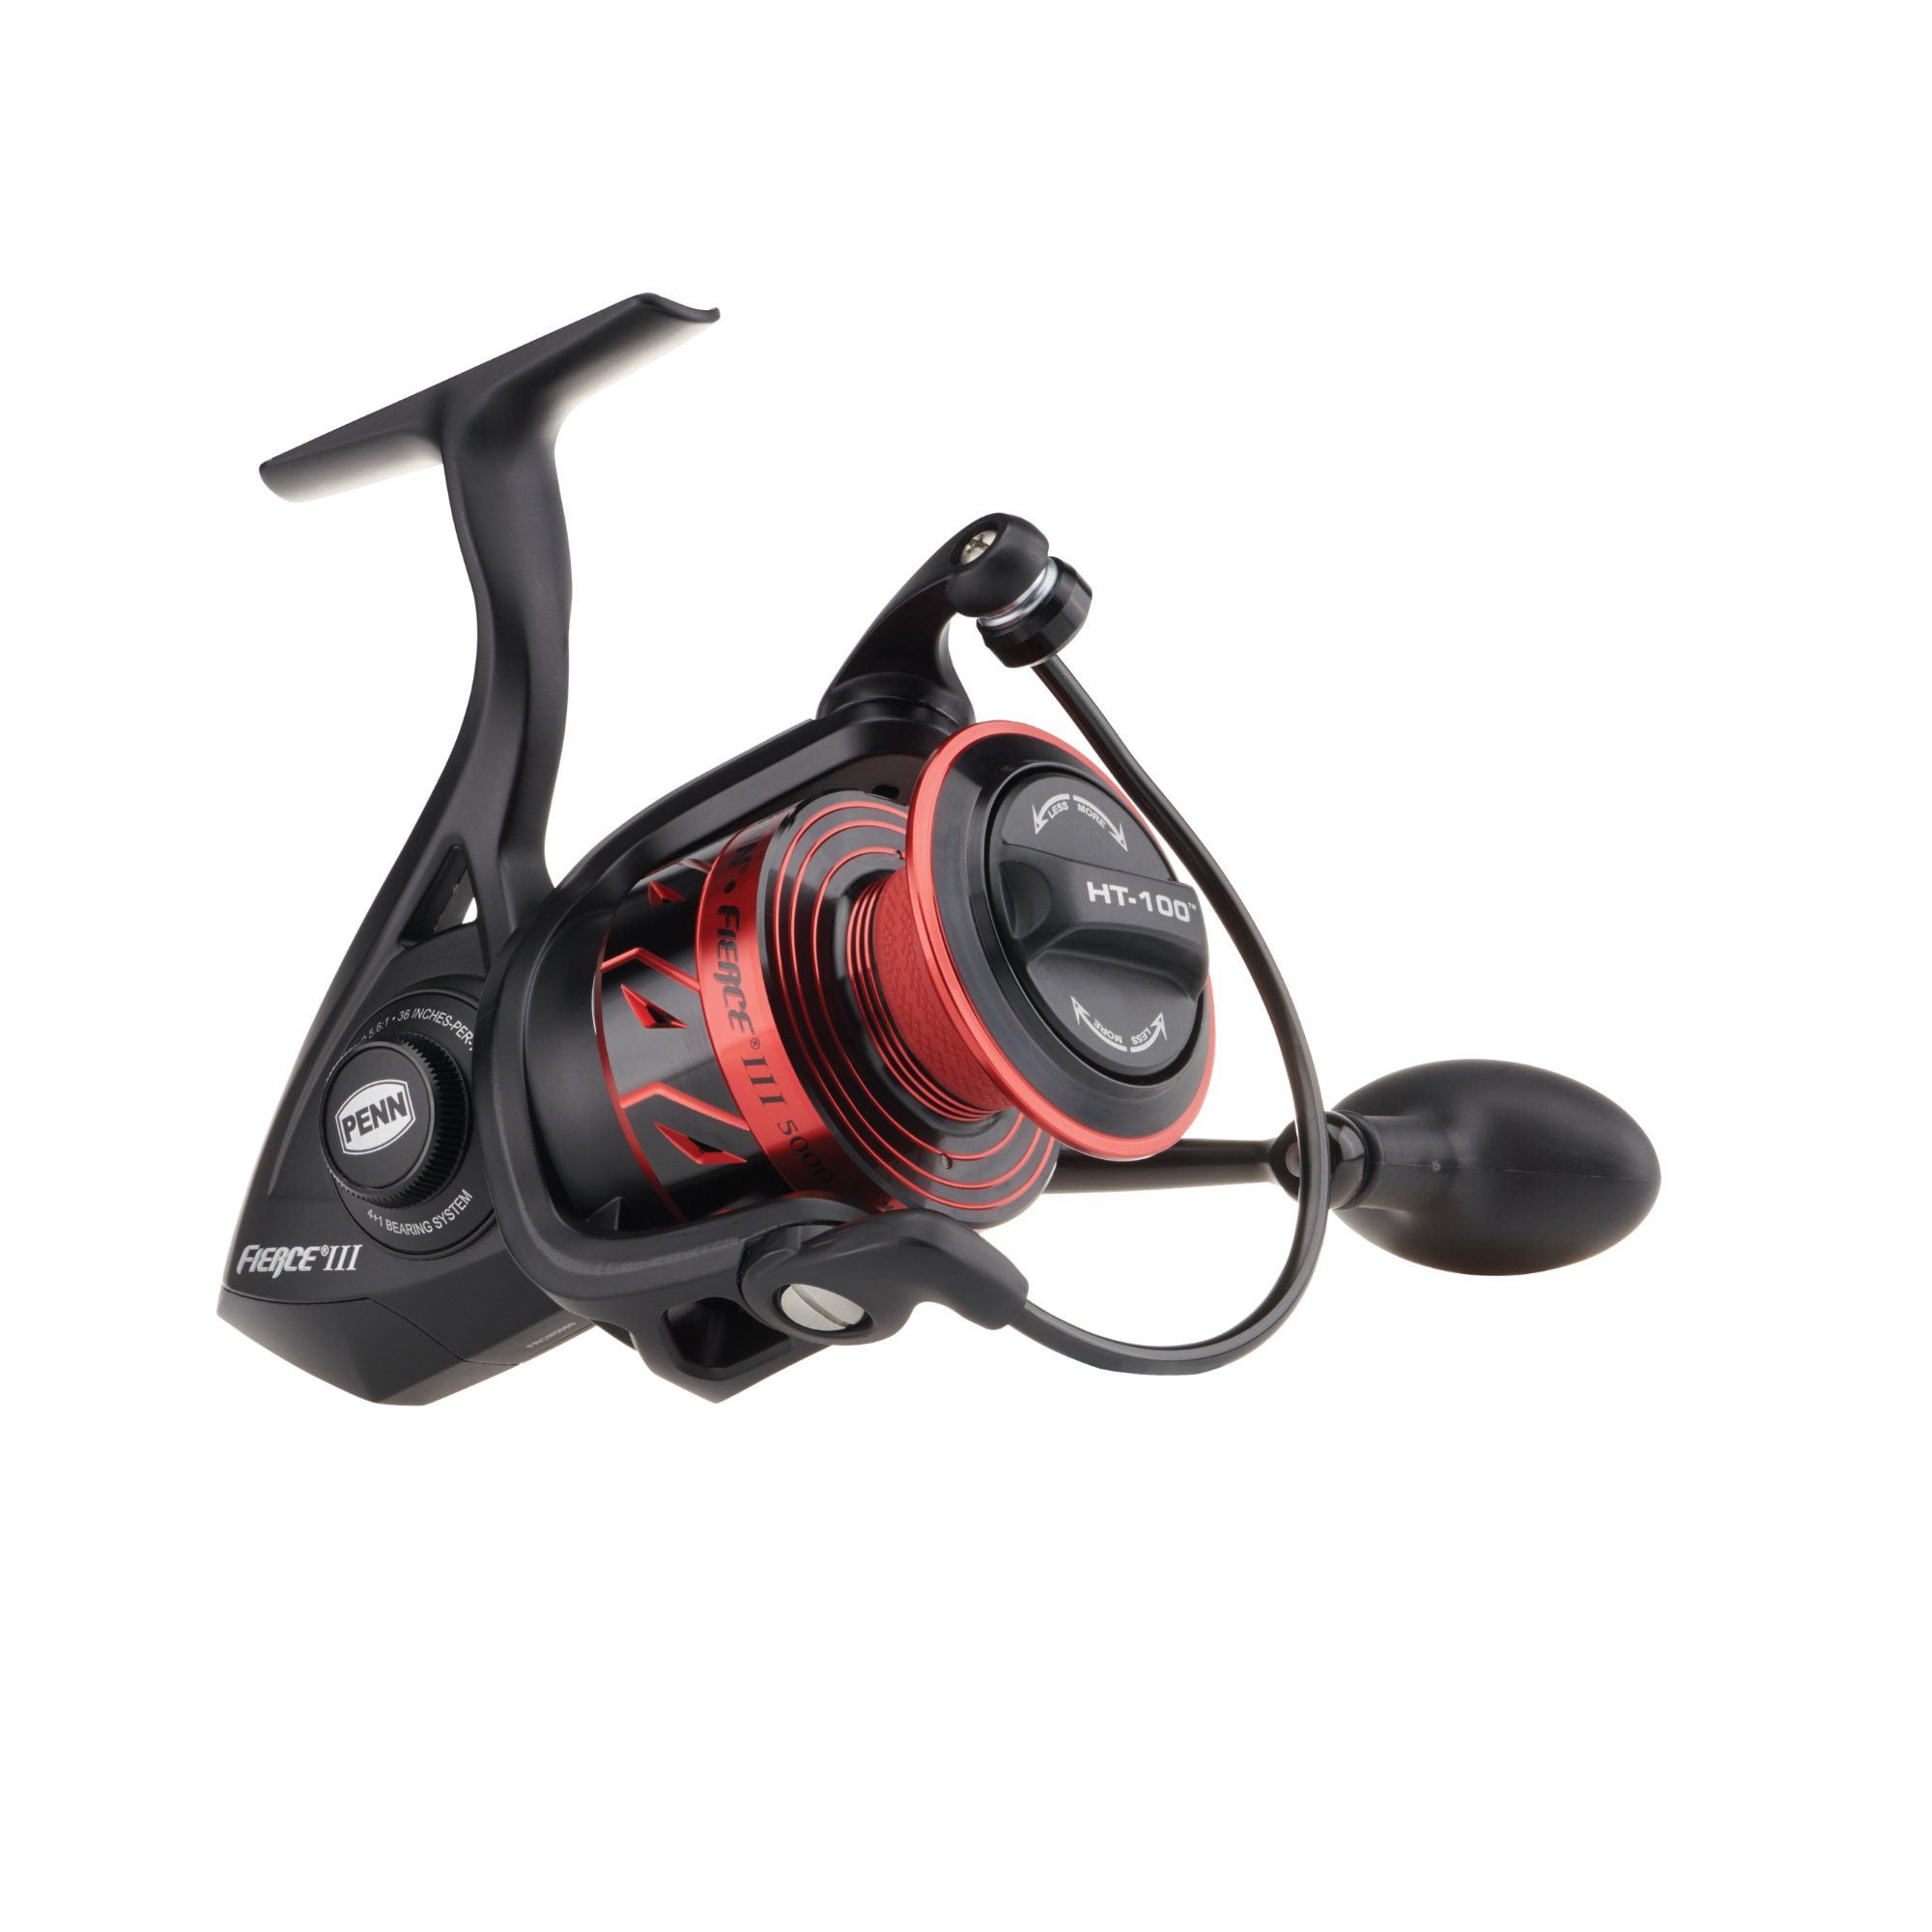 Experience the Power of the Penn Fishing FRC4000 Firece Spinning Reel